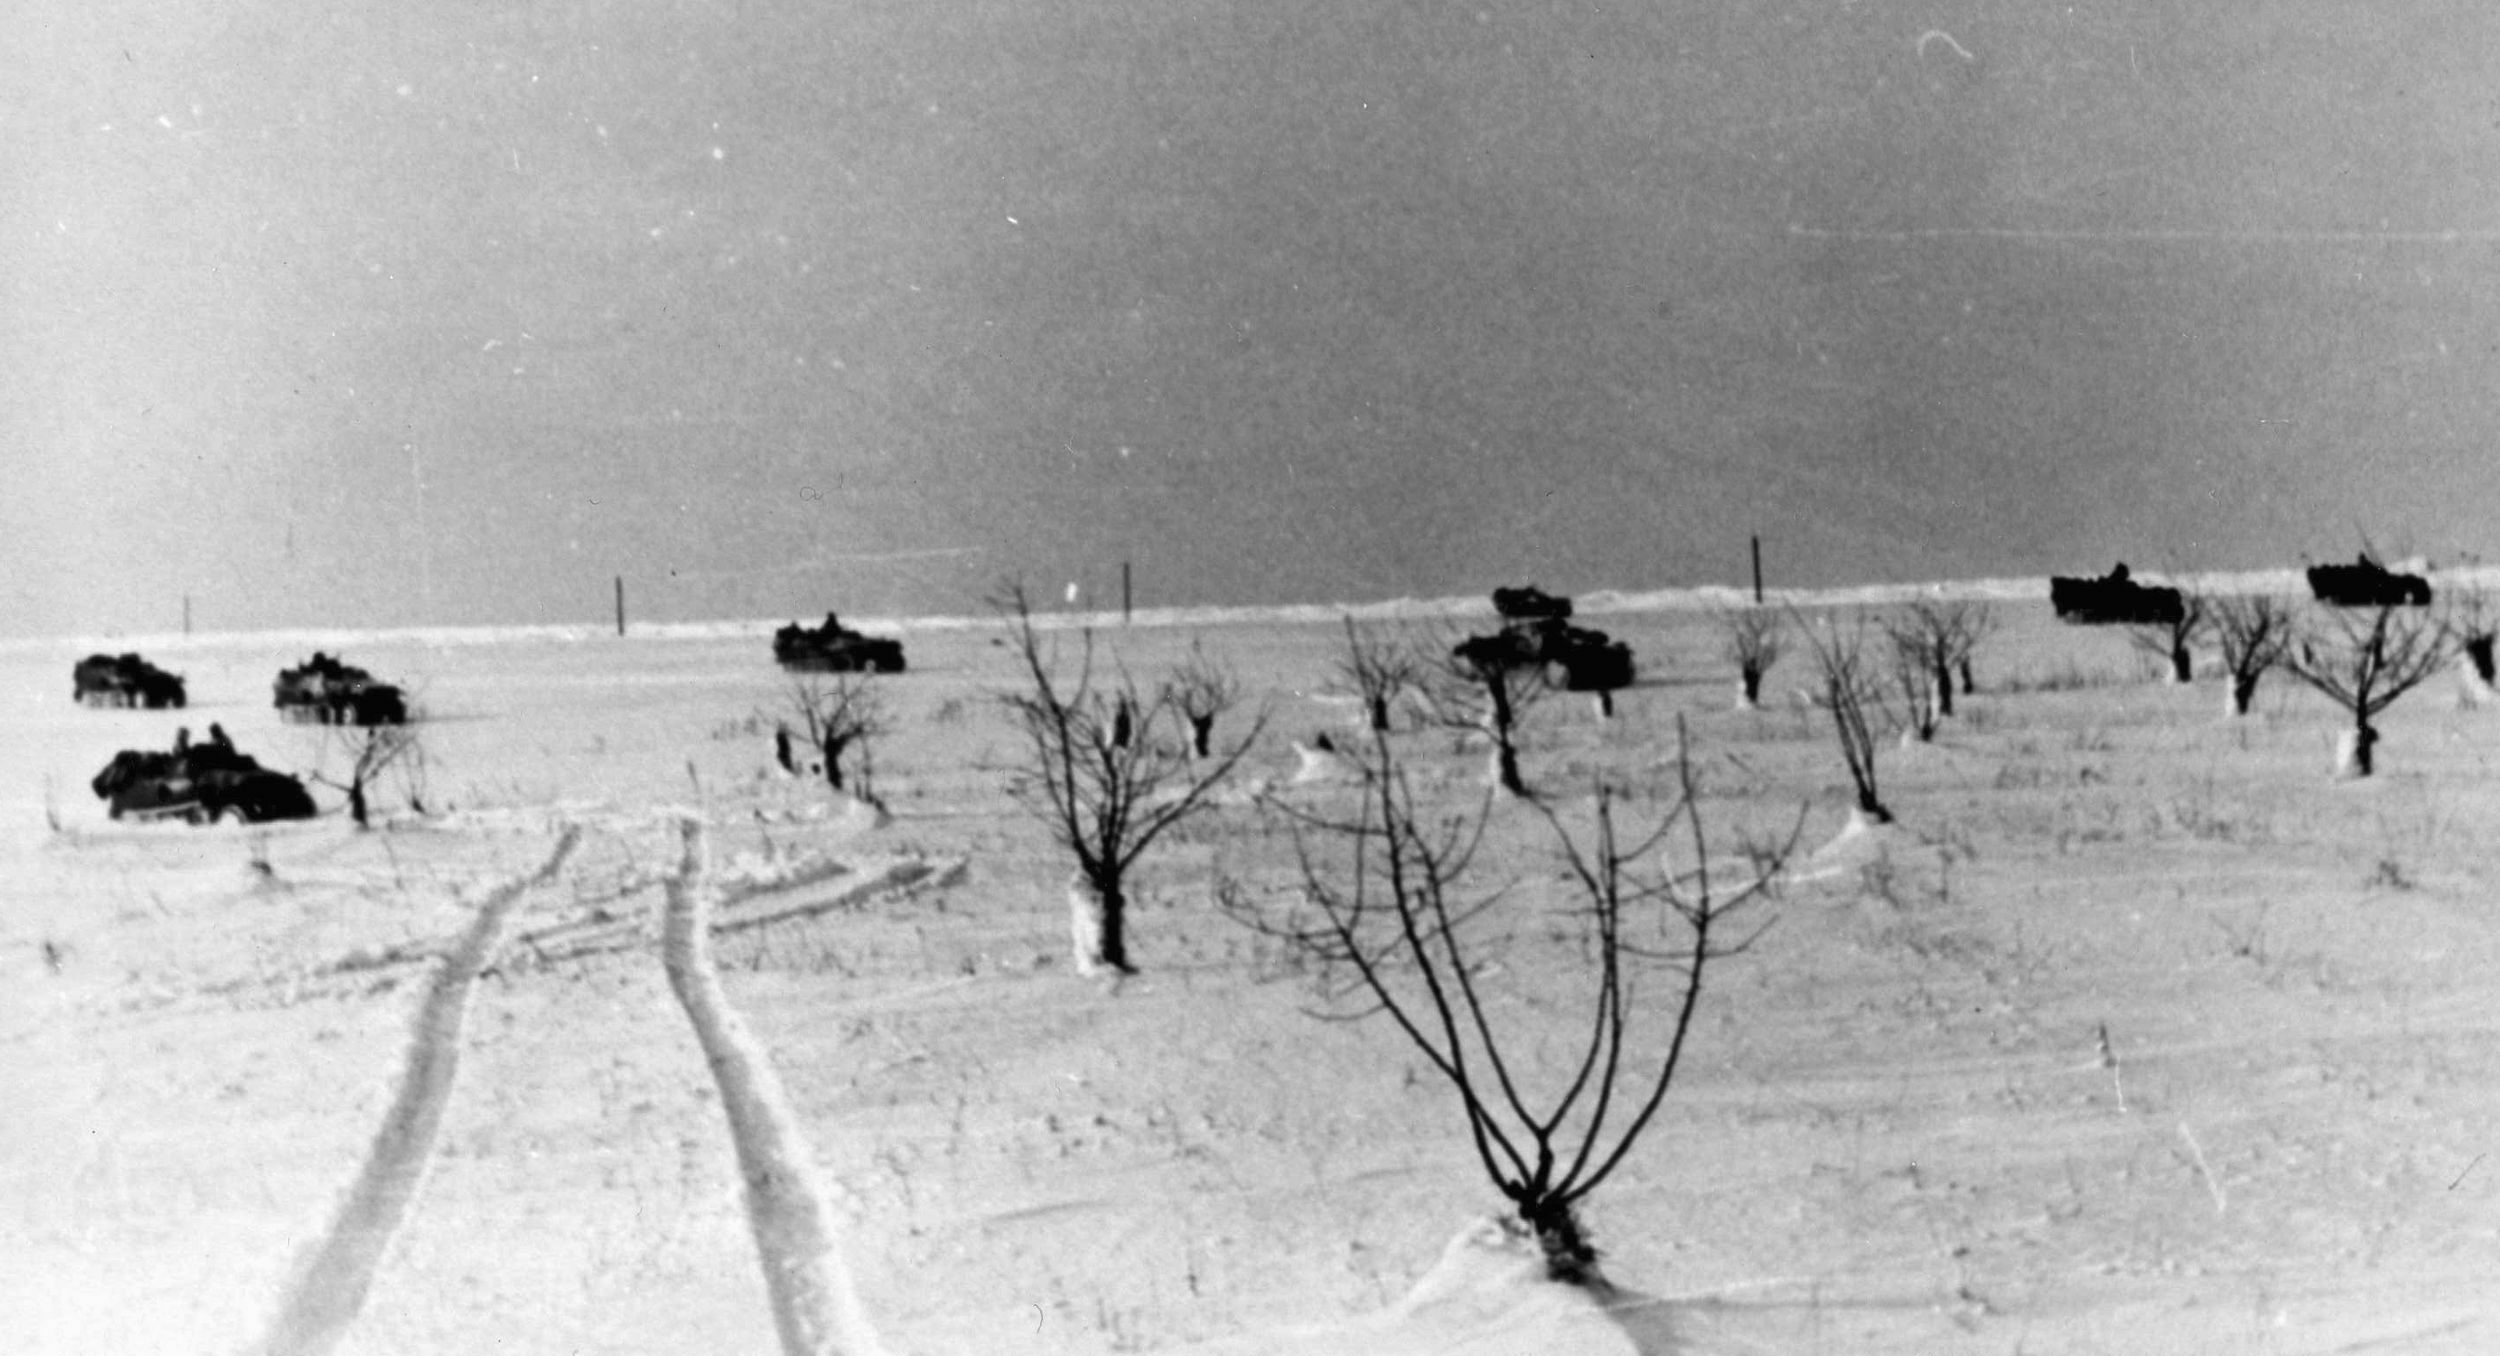 Spread across the wintry landscape of the Soviet Union, German armored vehicles advance eastward toward the major cities of Russia. The German timetable was upset by tenacious Soviet defenses and then compounded by horrific winter weather. 